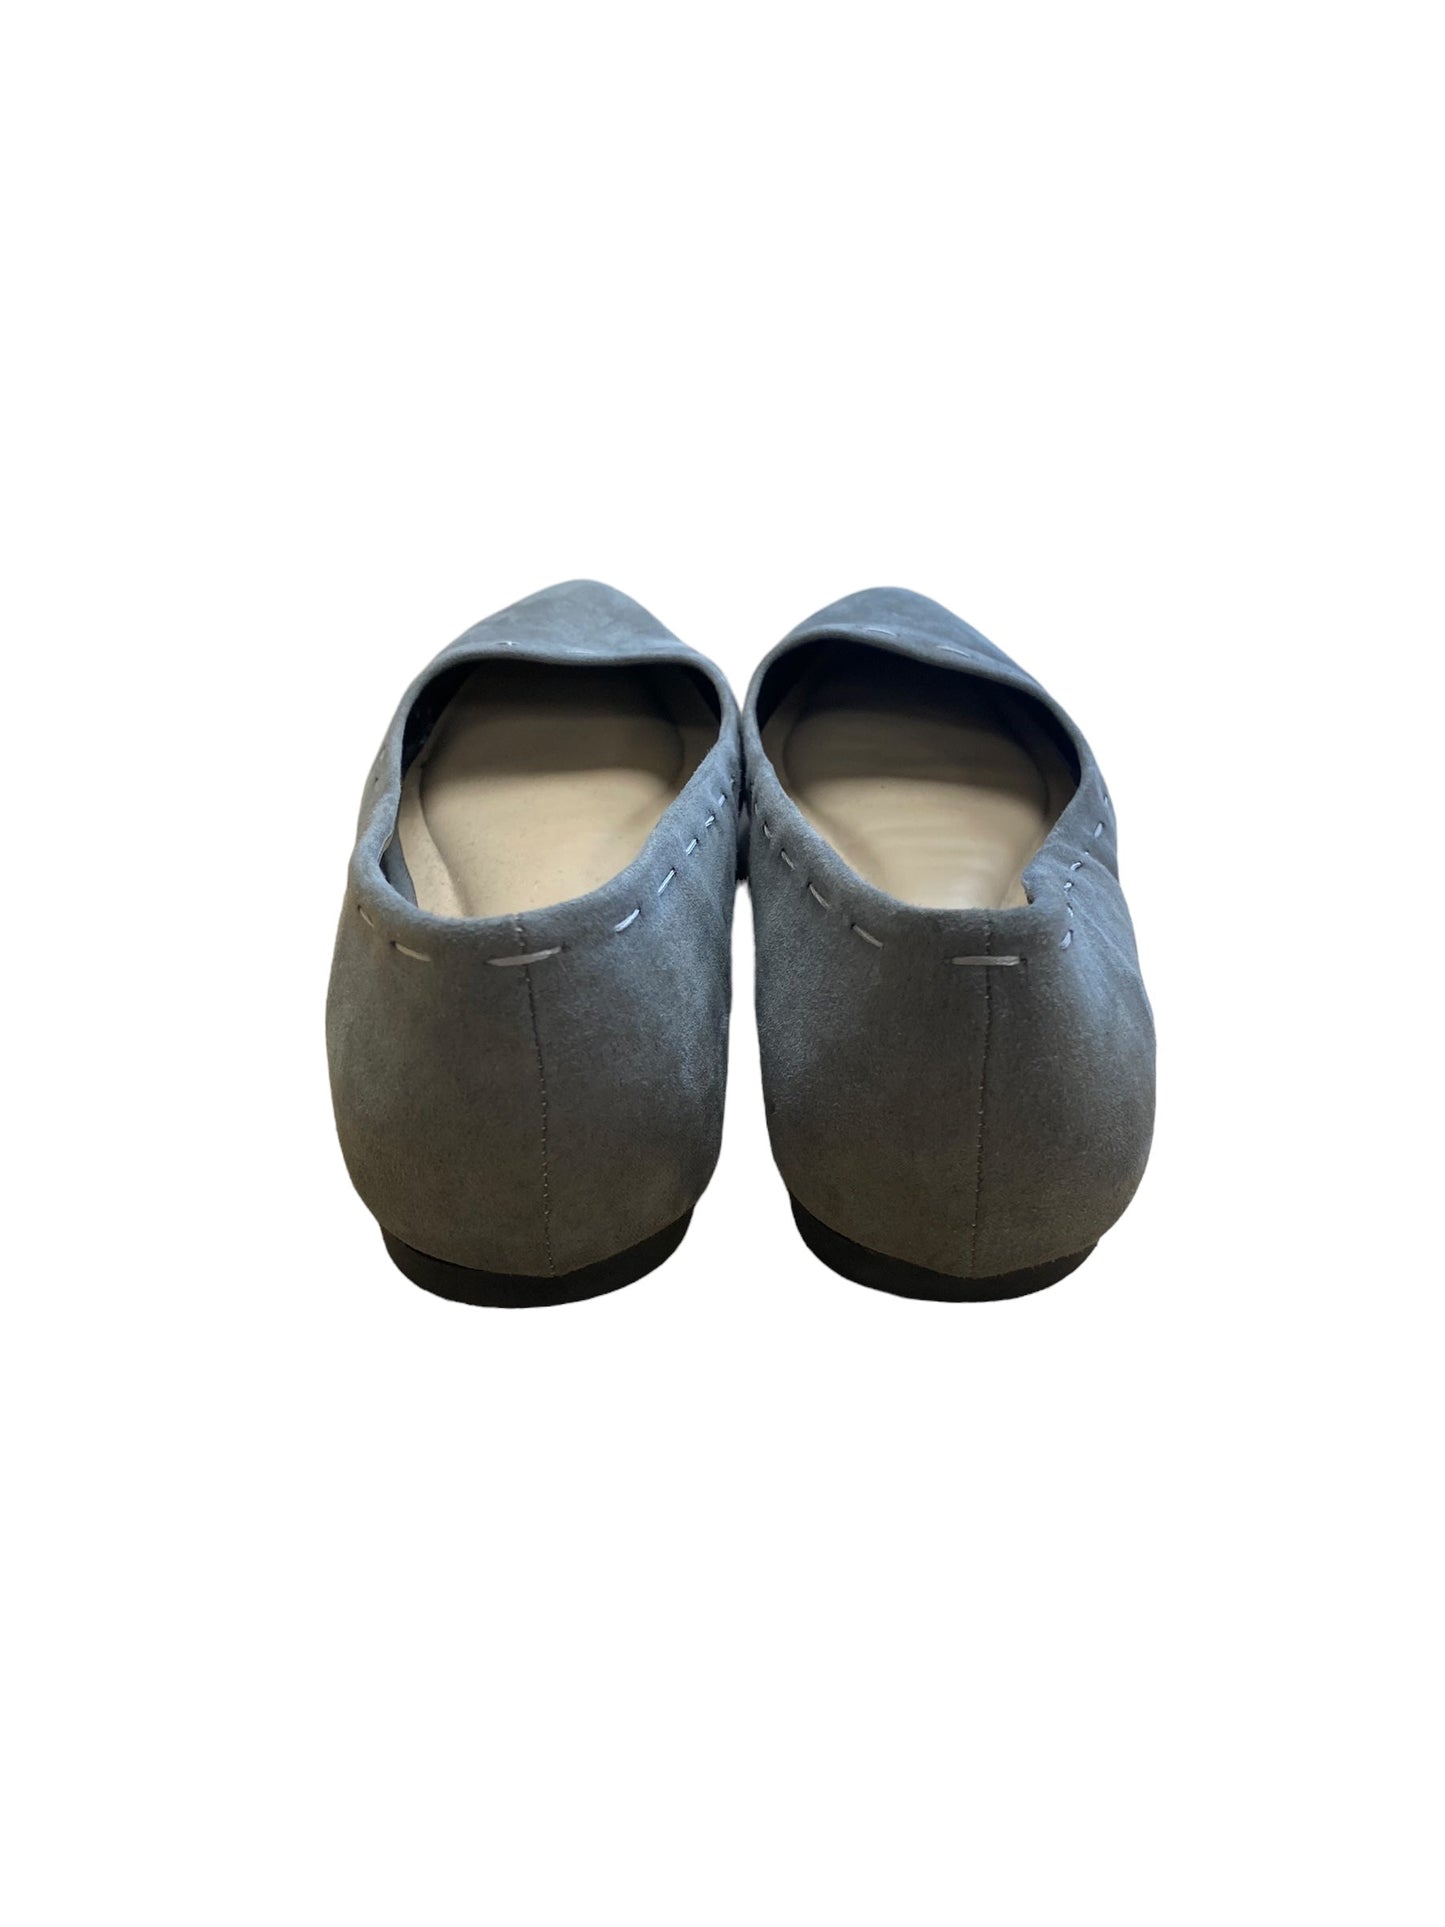 Grey Shoes Flats Clothes Mentor, Size 9